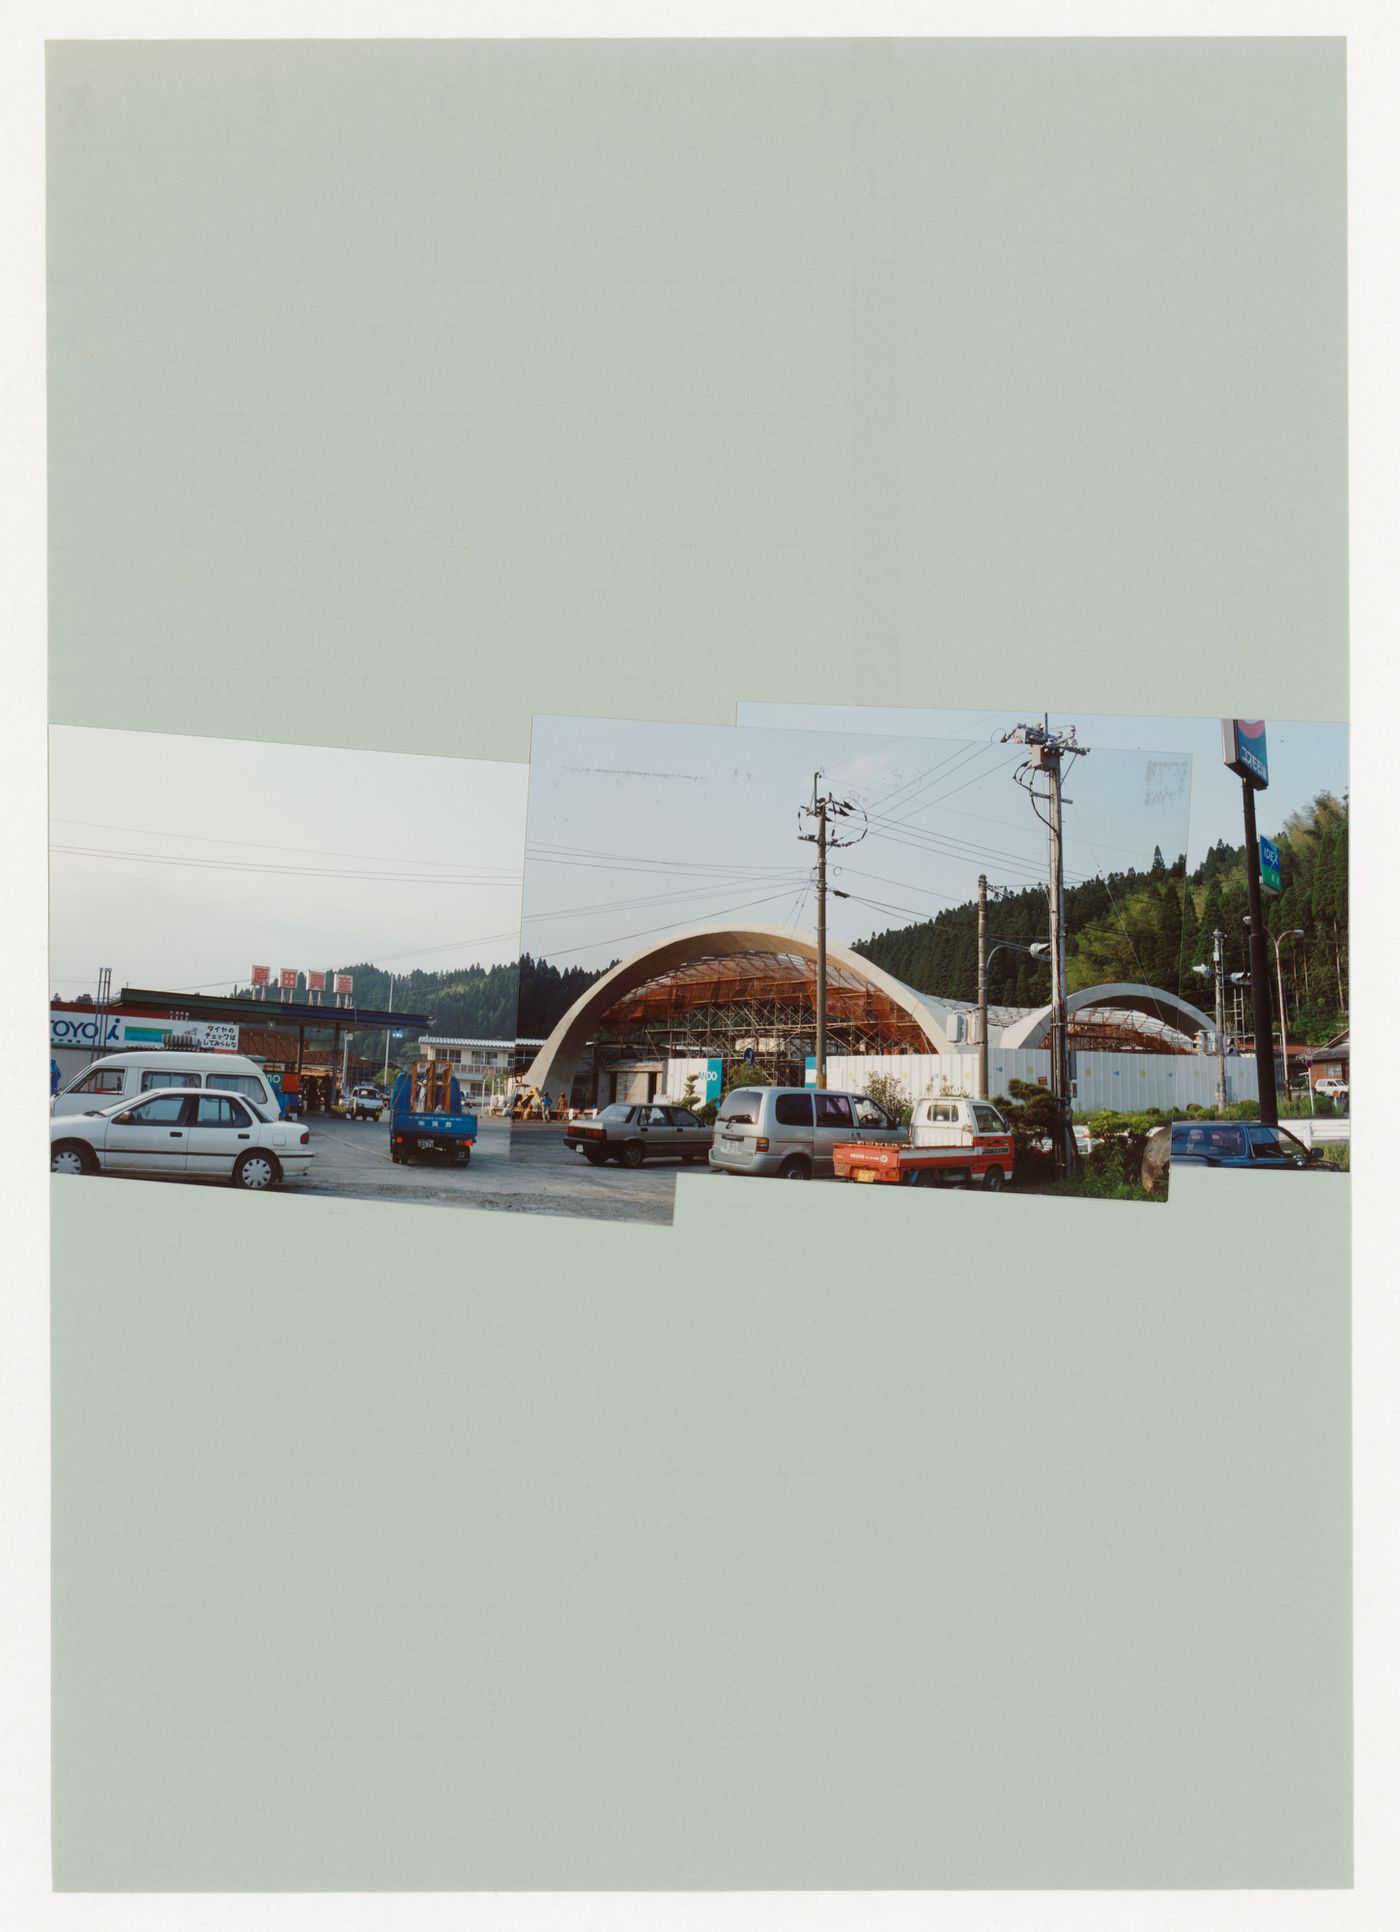 Album containing photographic materials and documents related to Glass Station, Oguni, Japan